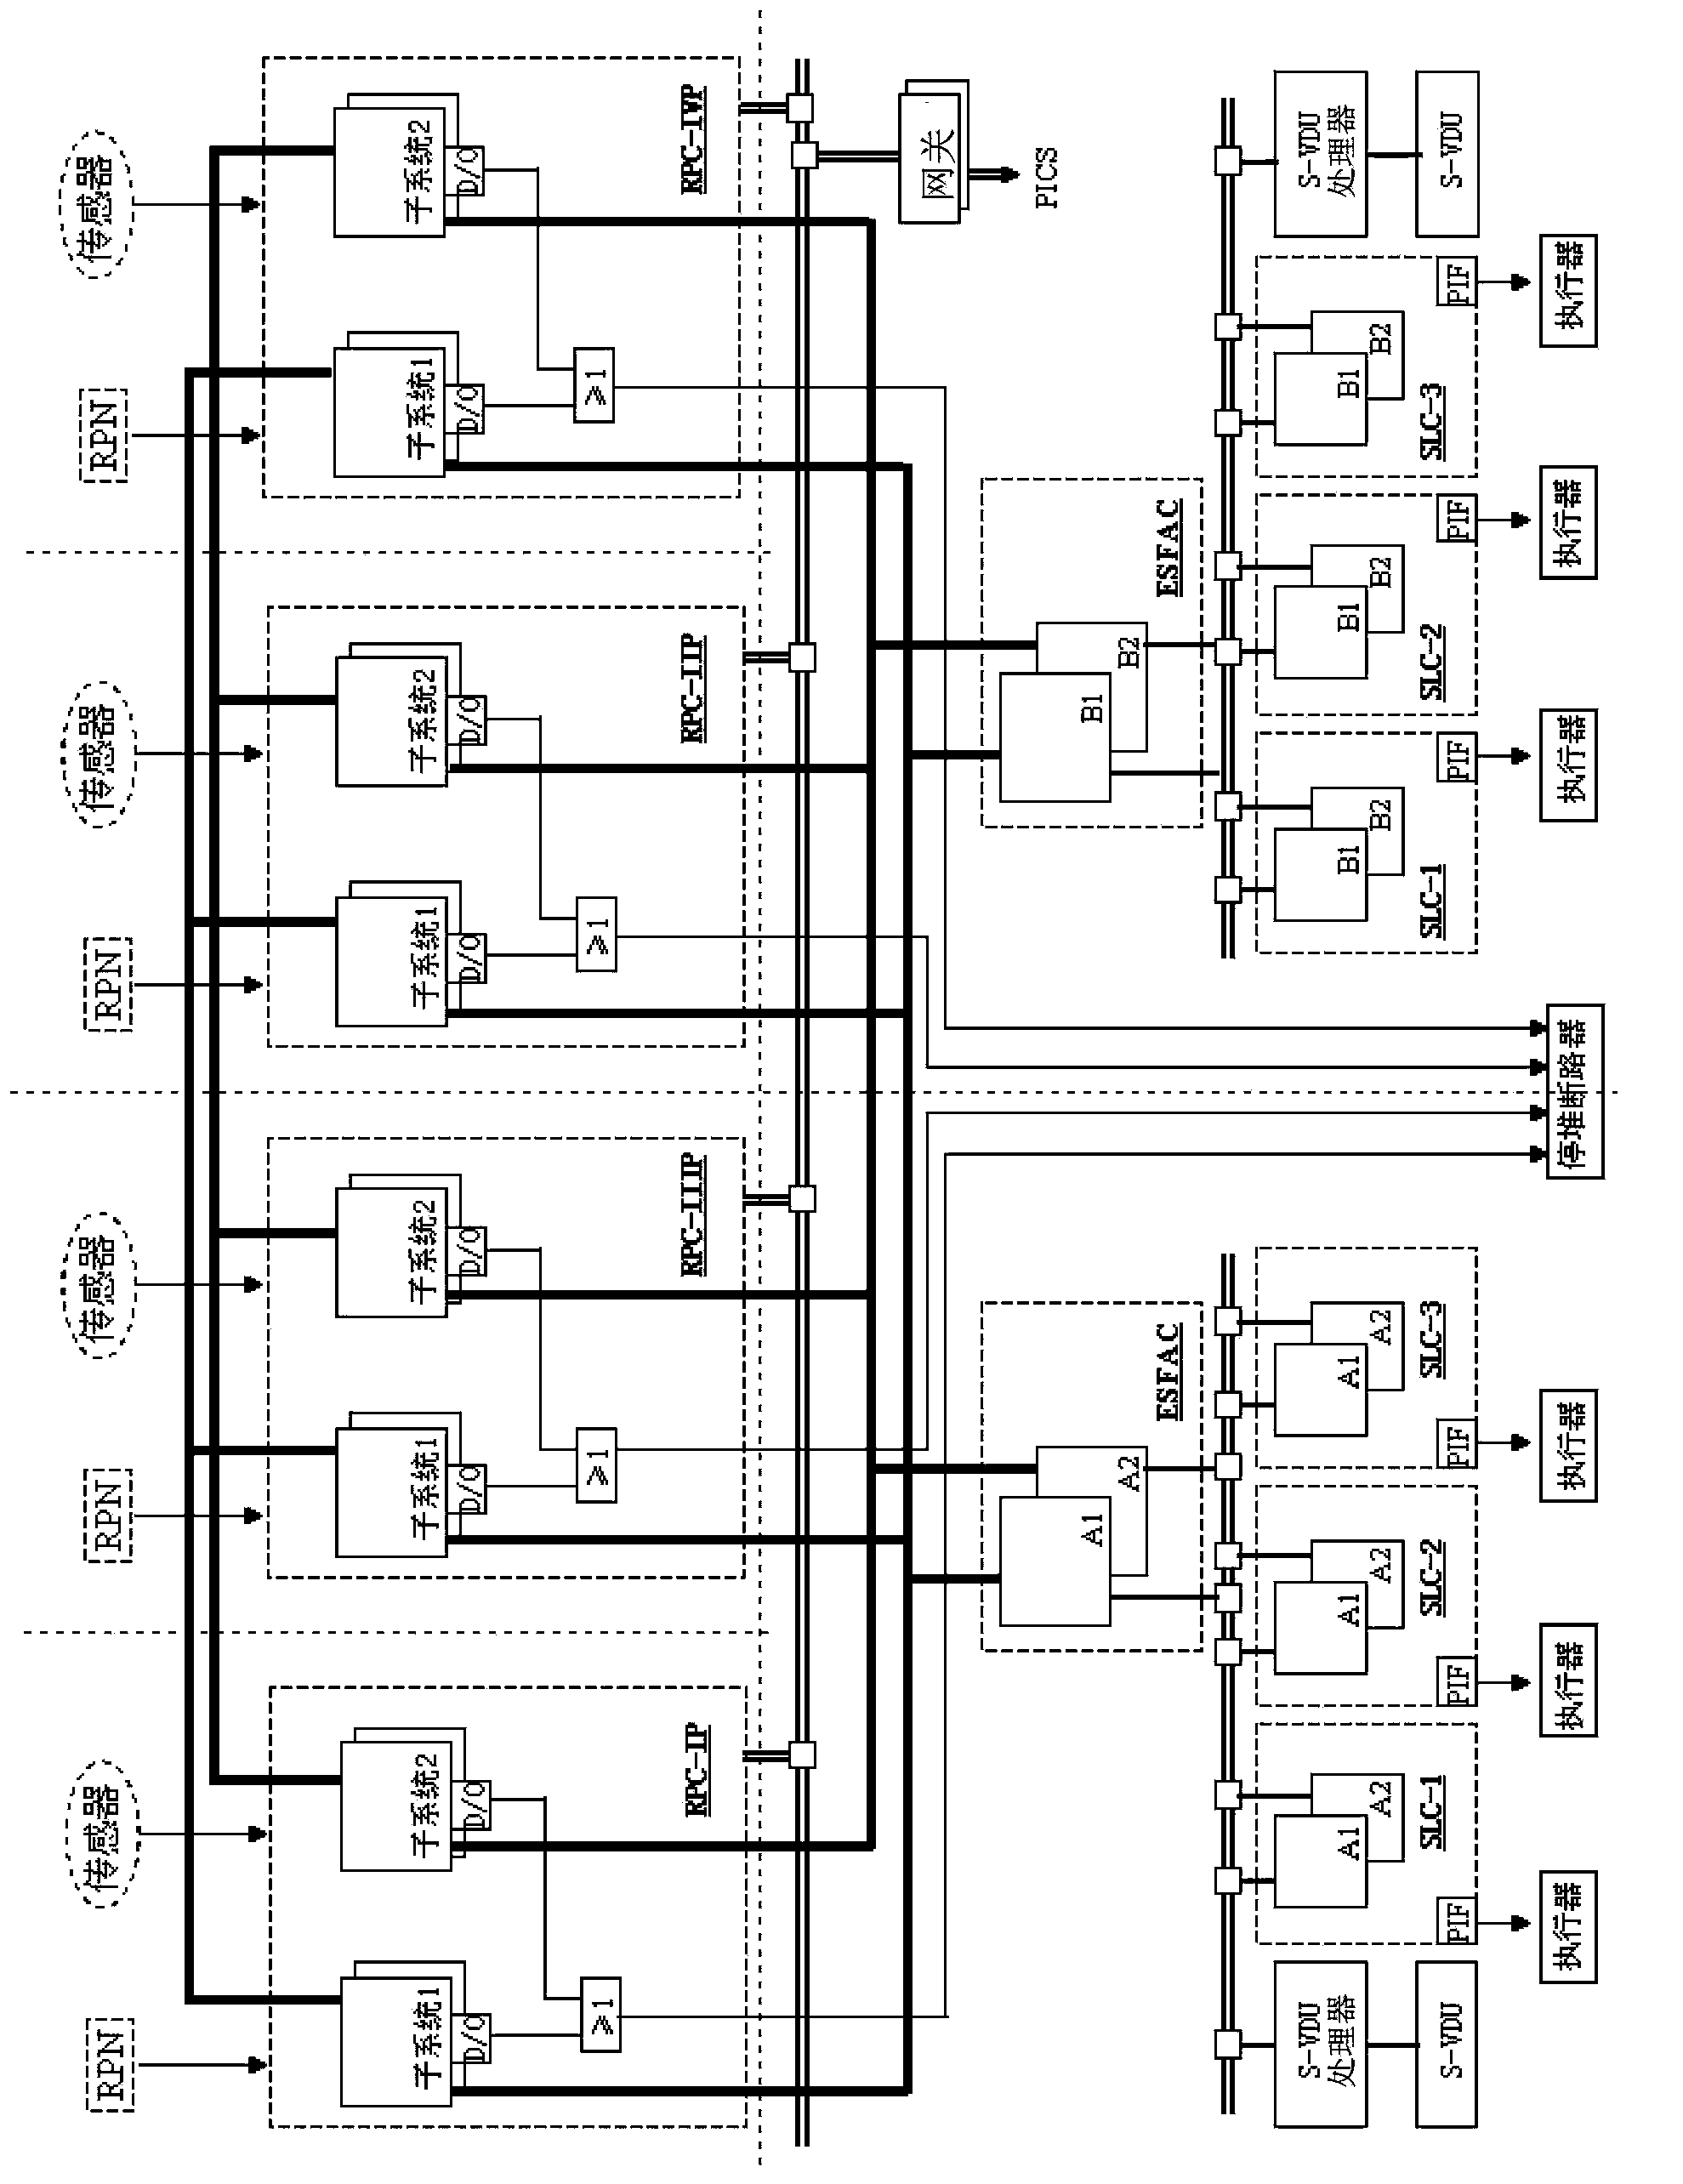 Nuclear power plant double digital quantity output card configuration system and method